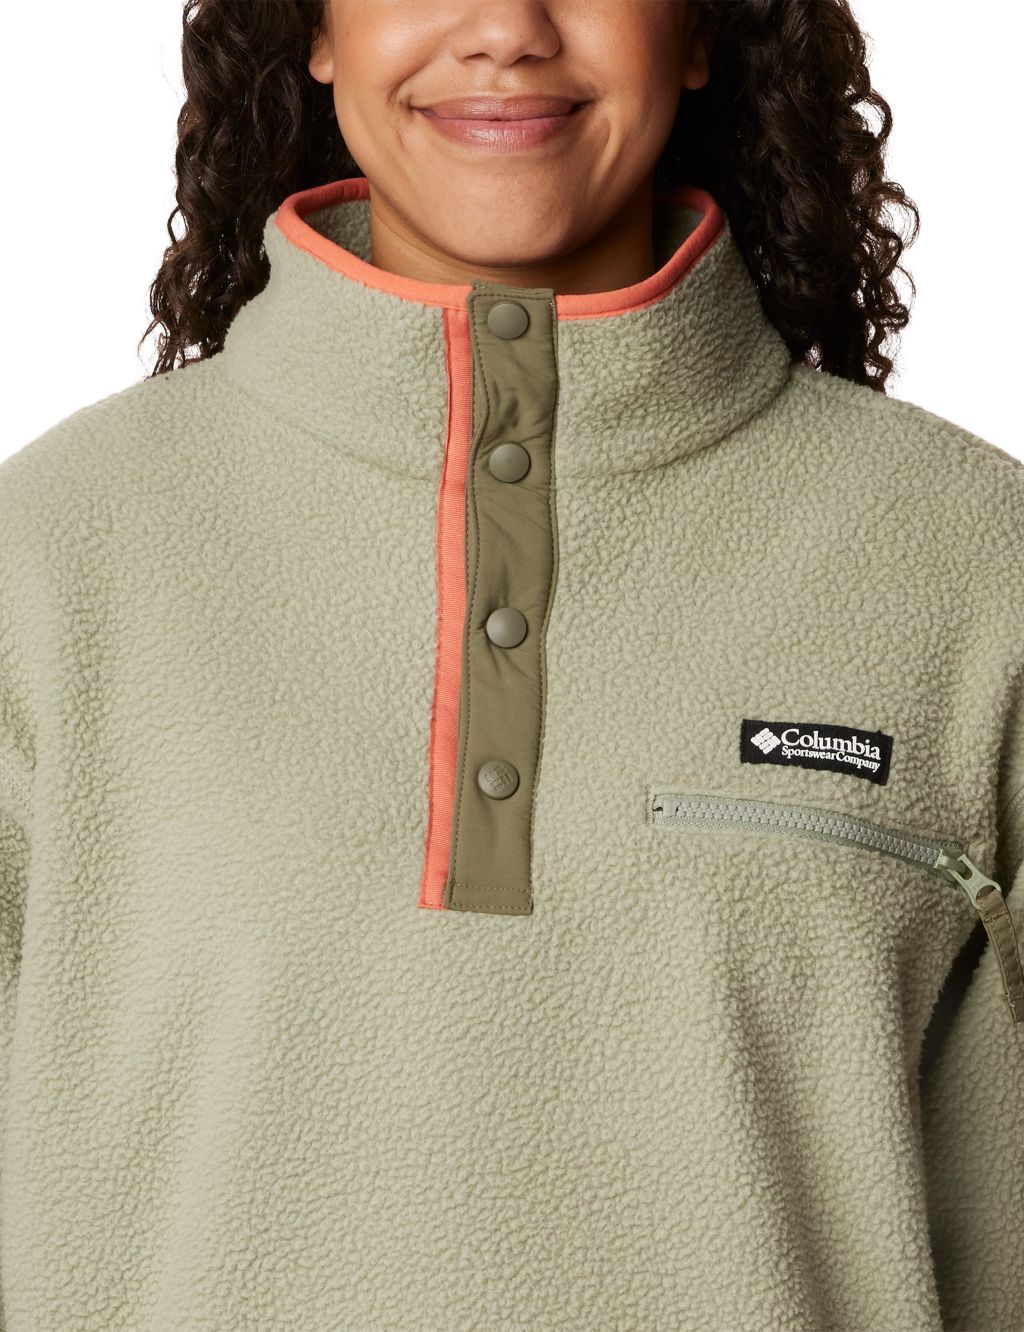 Helvetia Funnel Neck Cropped Jacket image 4